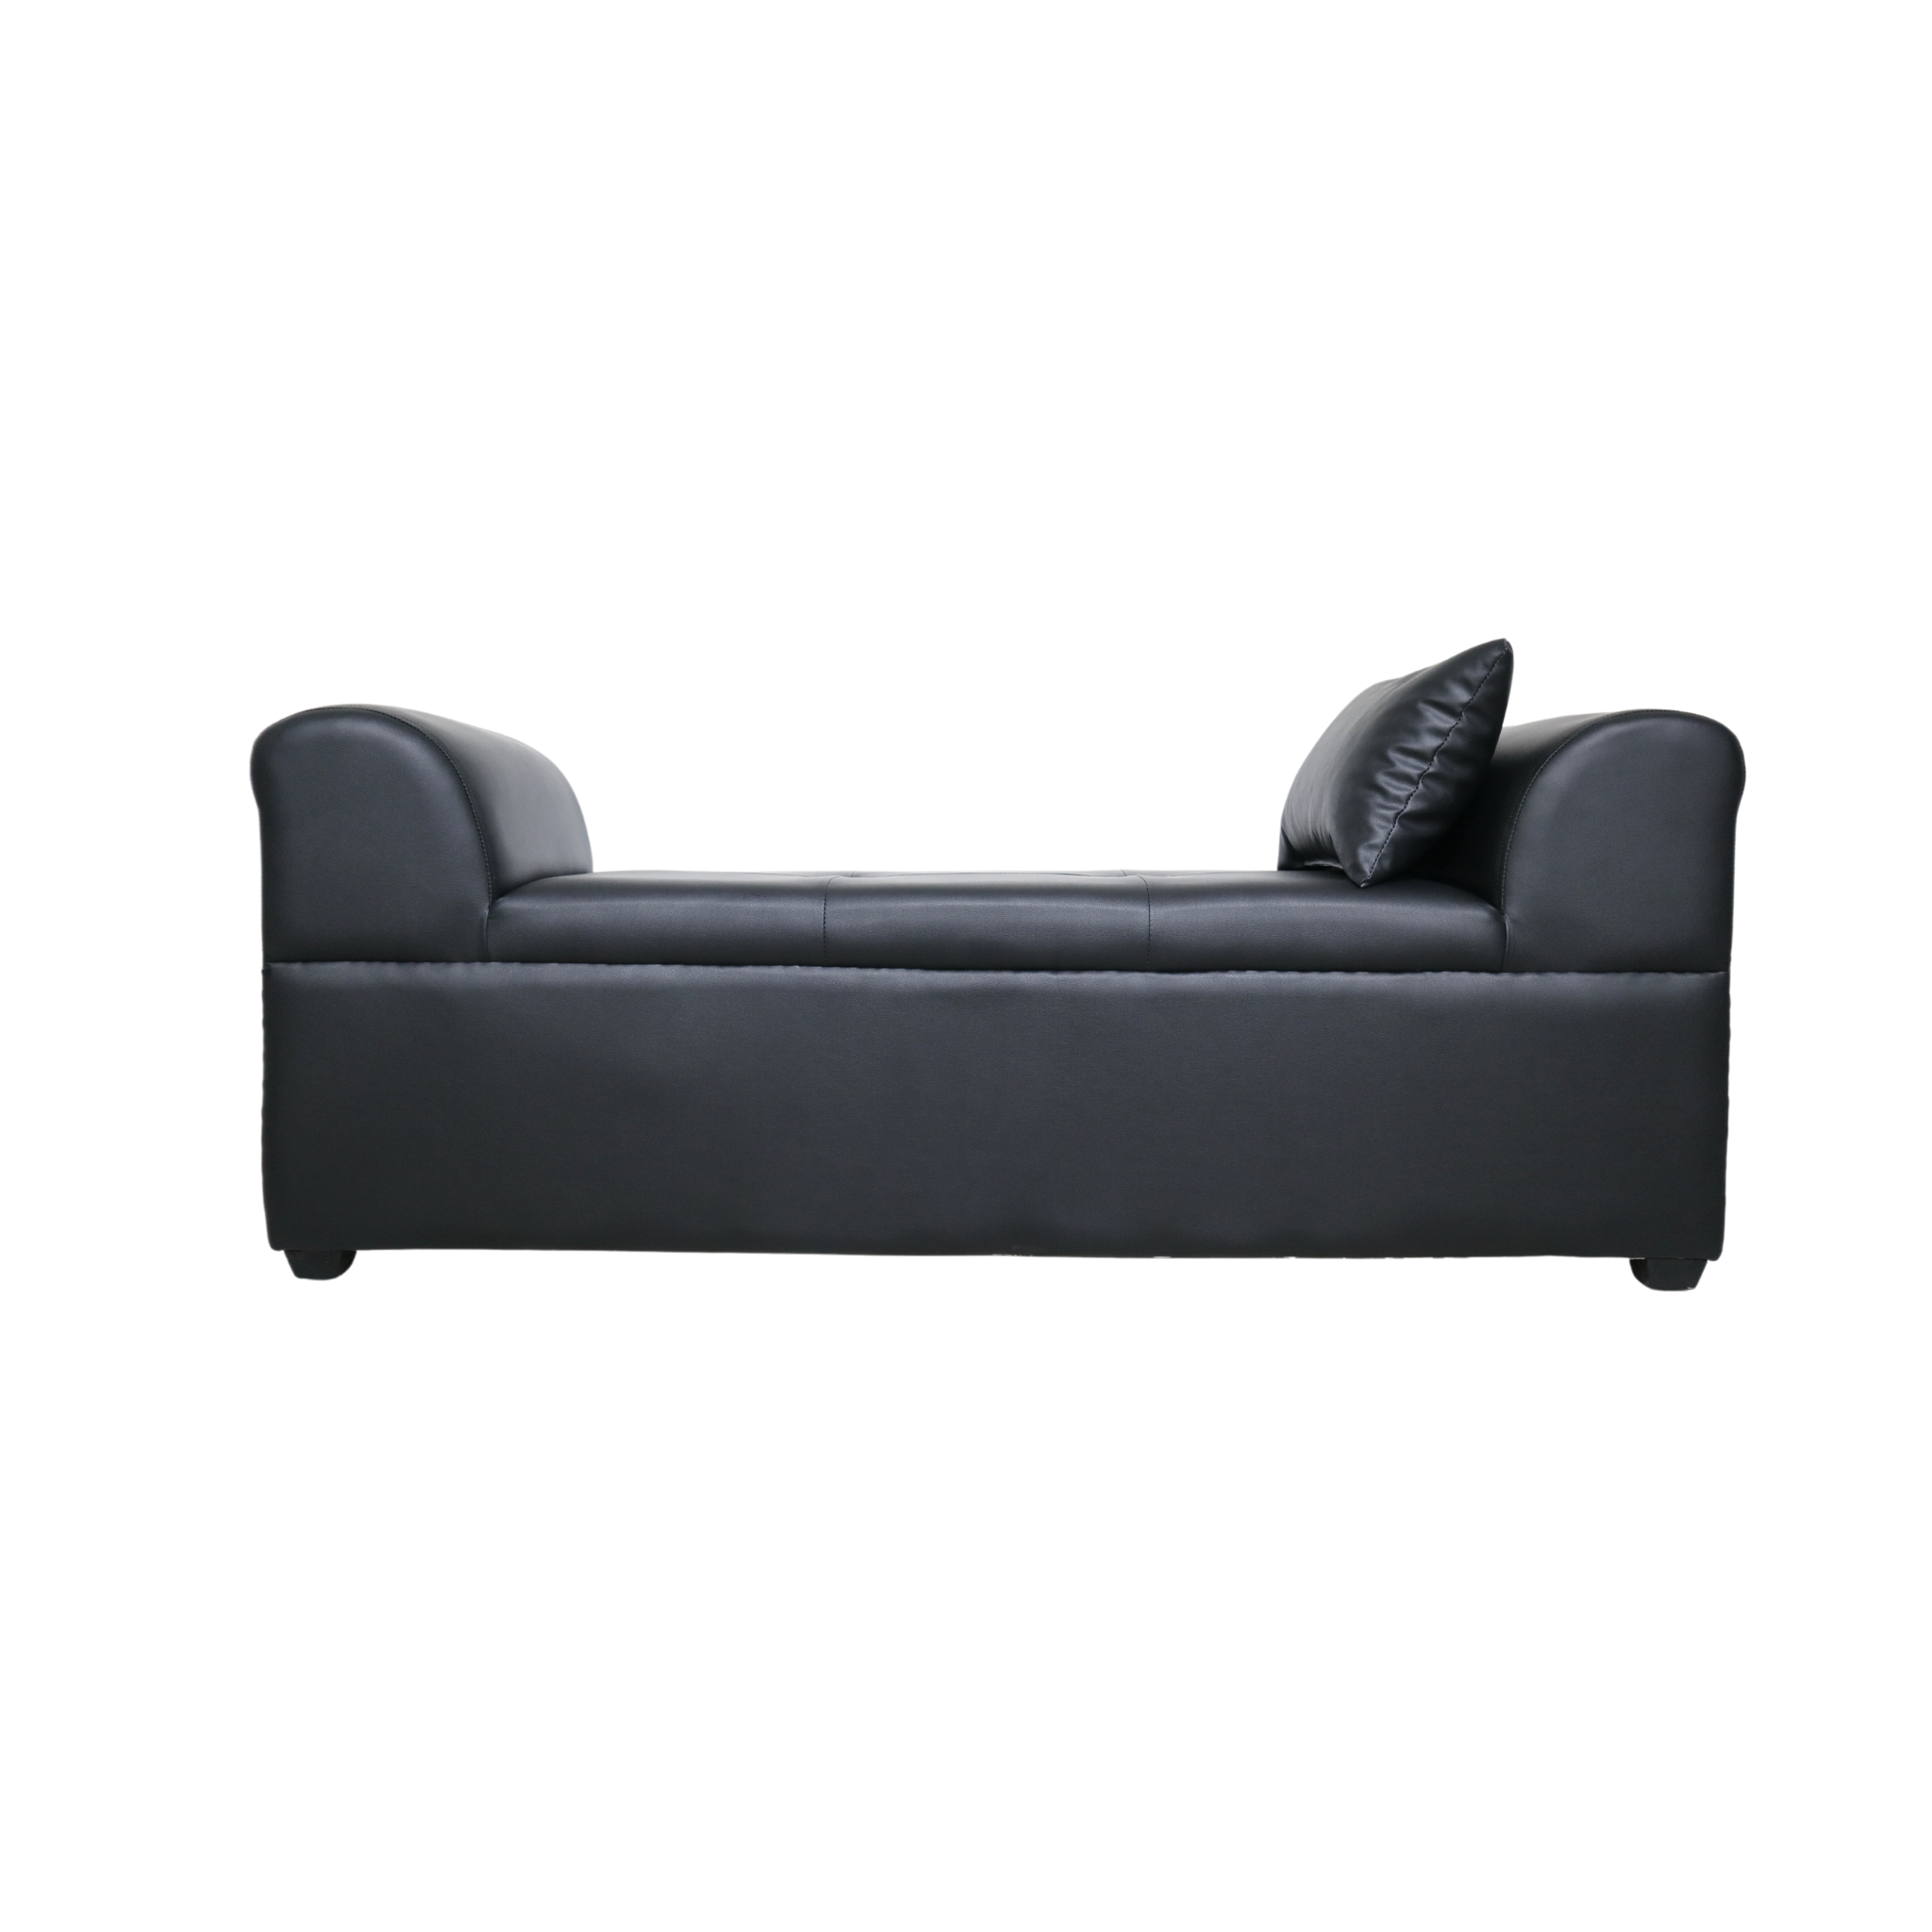 APOLO Bench Leather Sofa AF Home